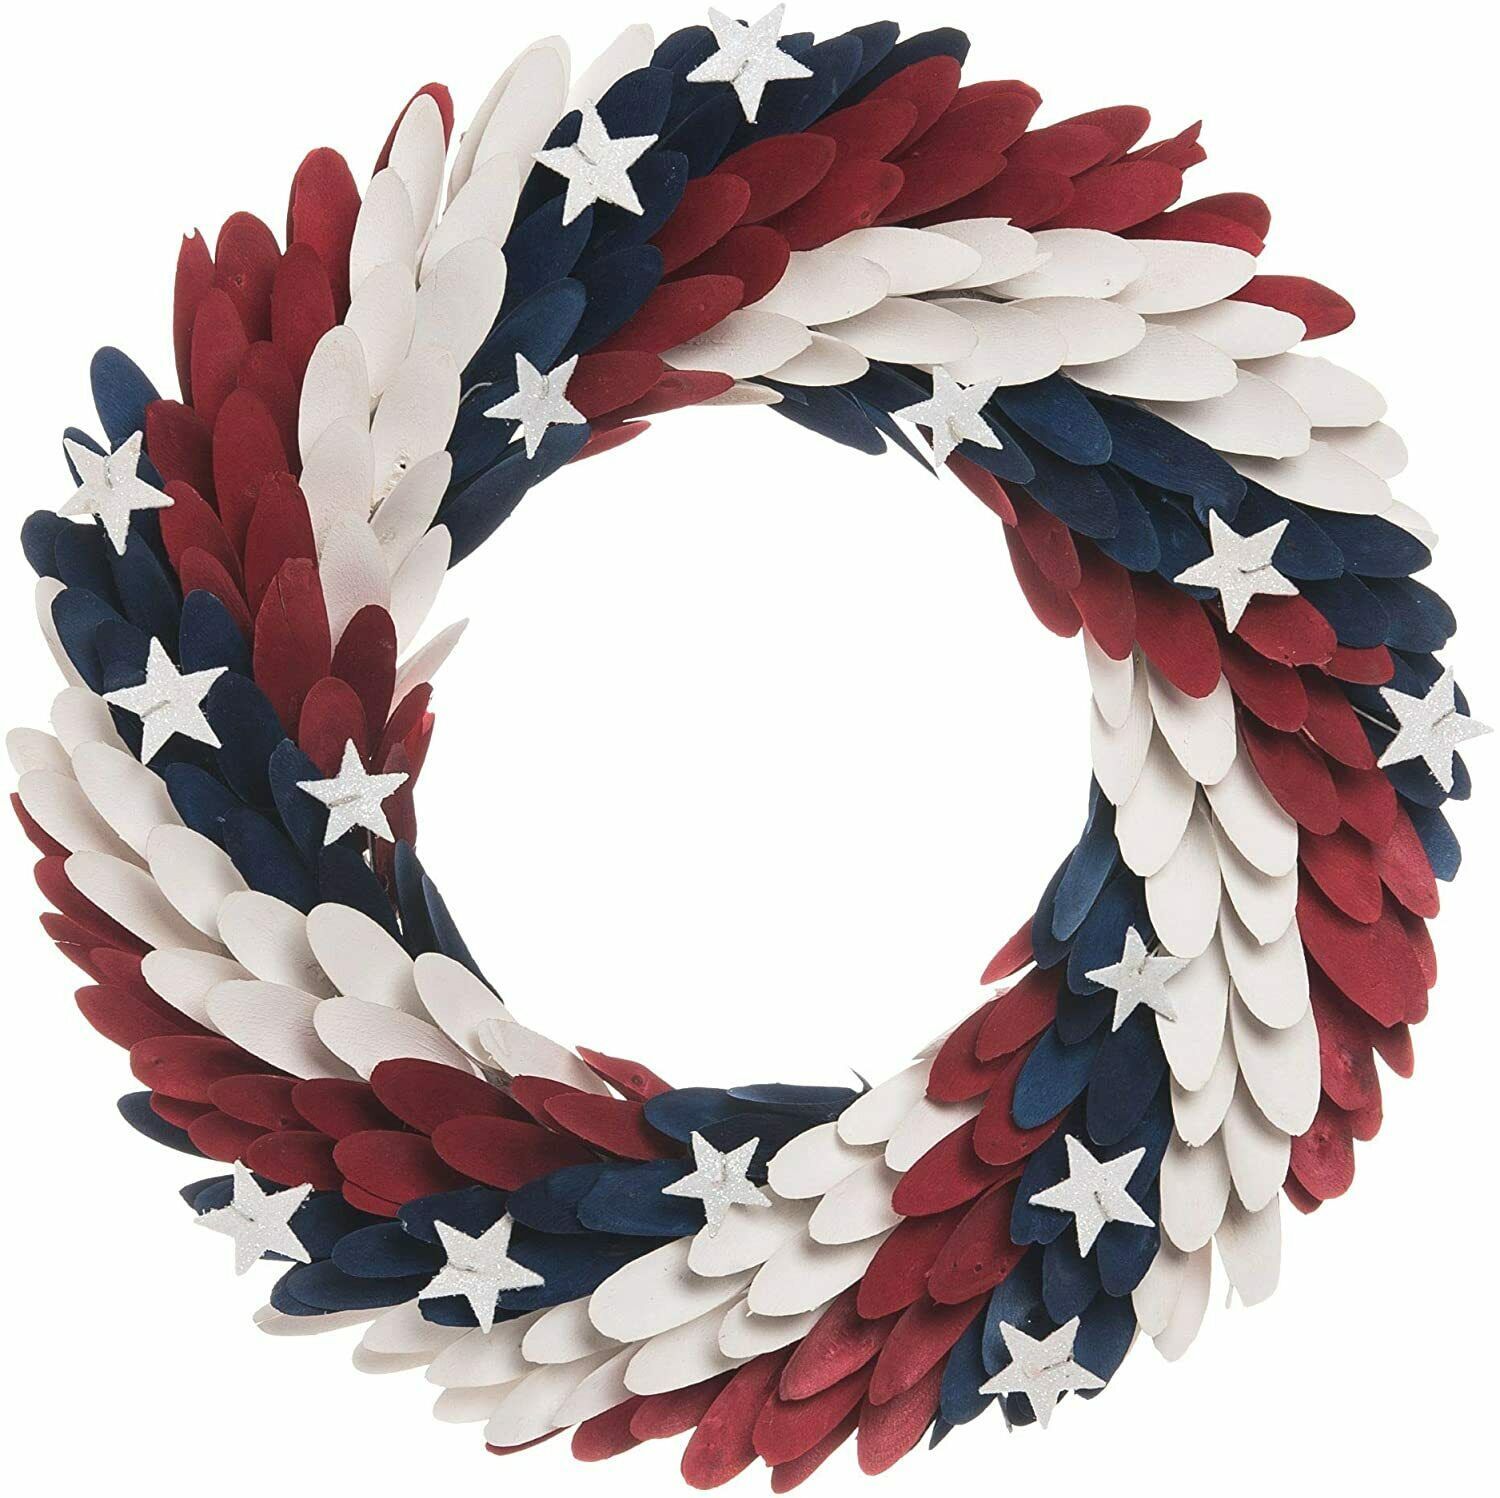 Primary image for Patriotic USA Styrofoam Wood Curl Wreath for Labor Day, Memorial Day (a) M5